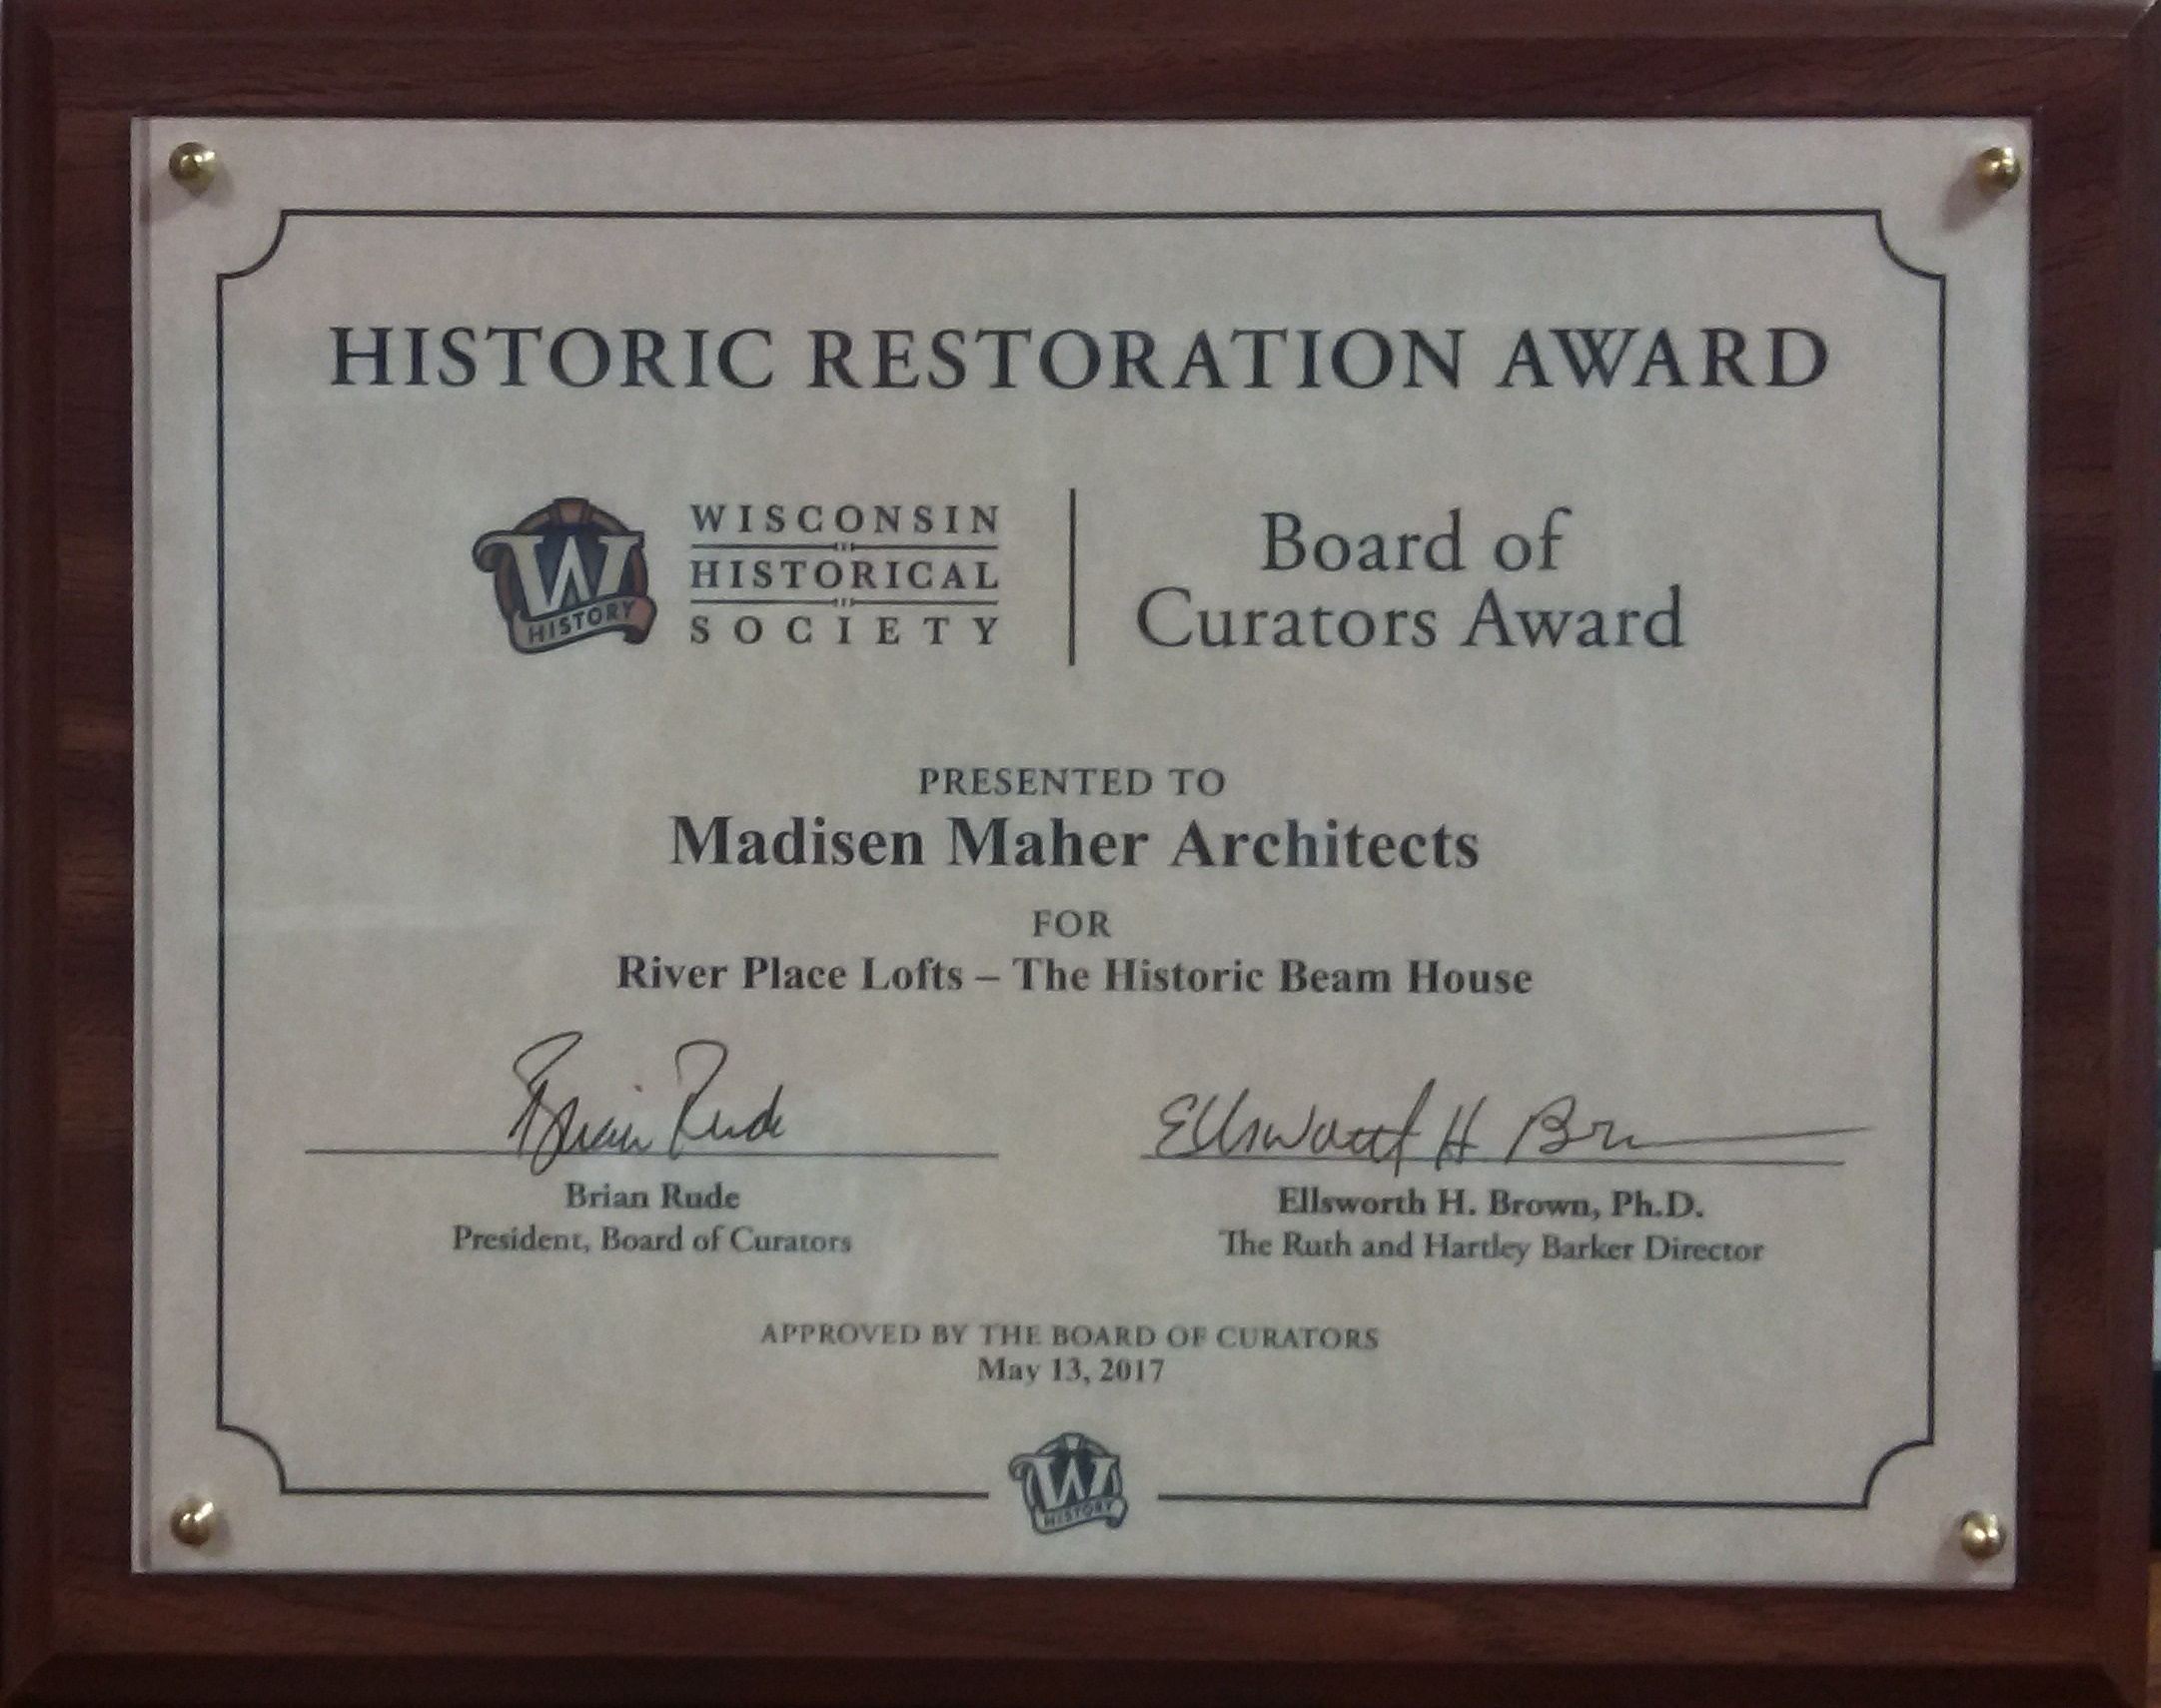 Mma Accepts Historic Restoration Award From Wisconsin Historical